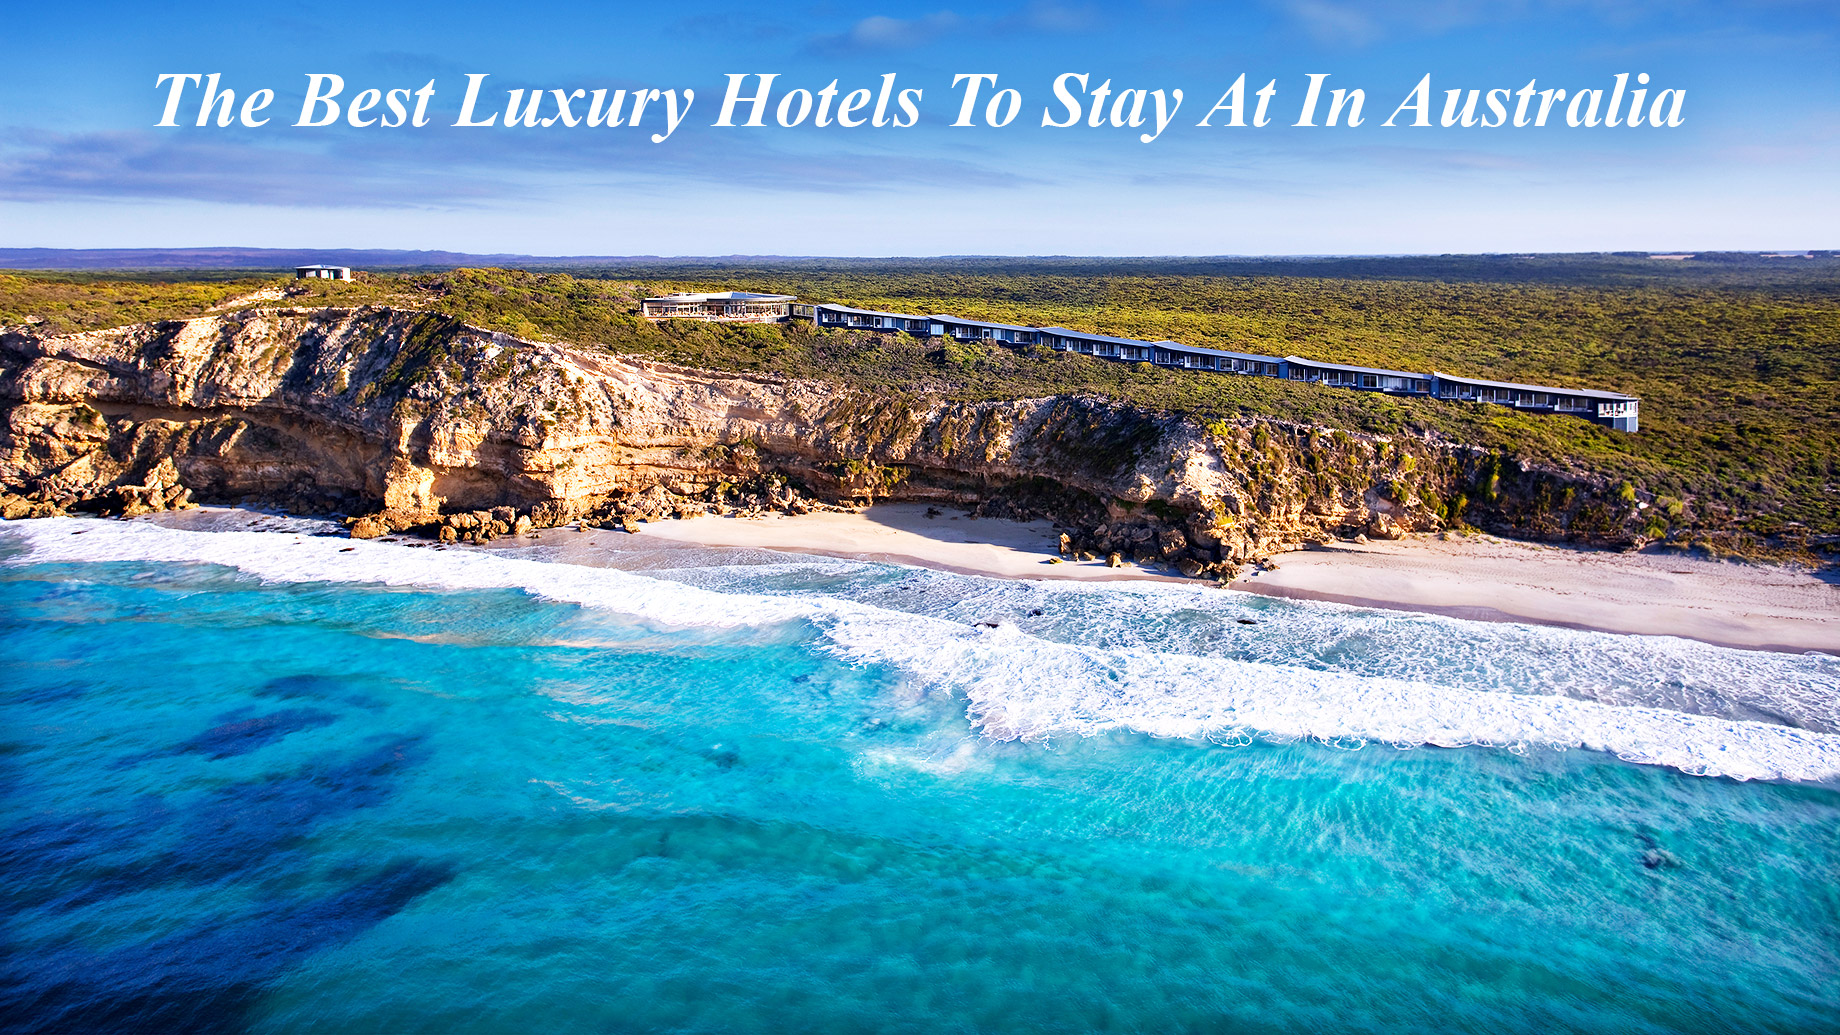 The Best Luxury Hotels To Stay At In Australia